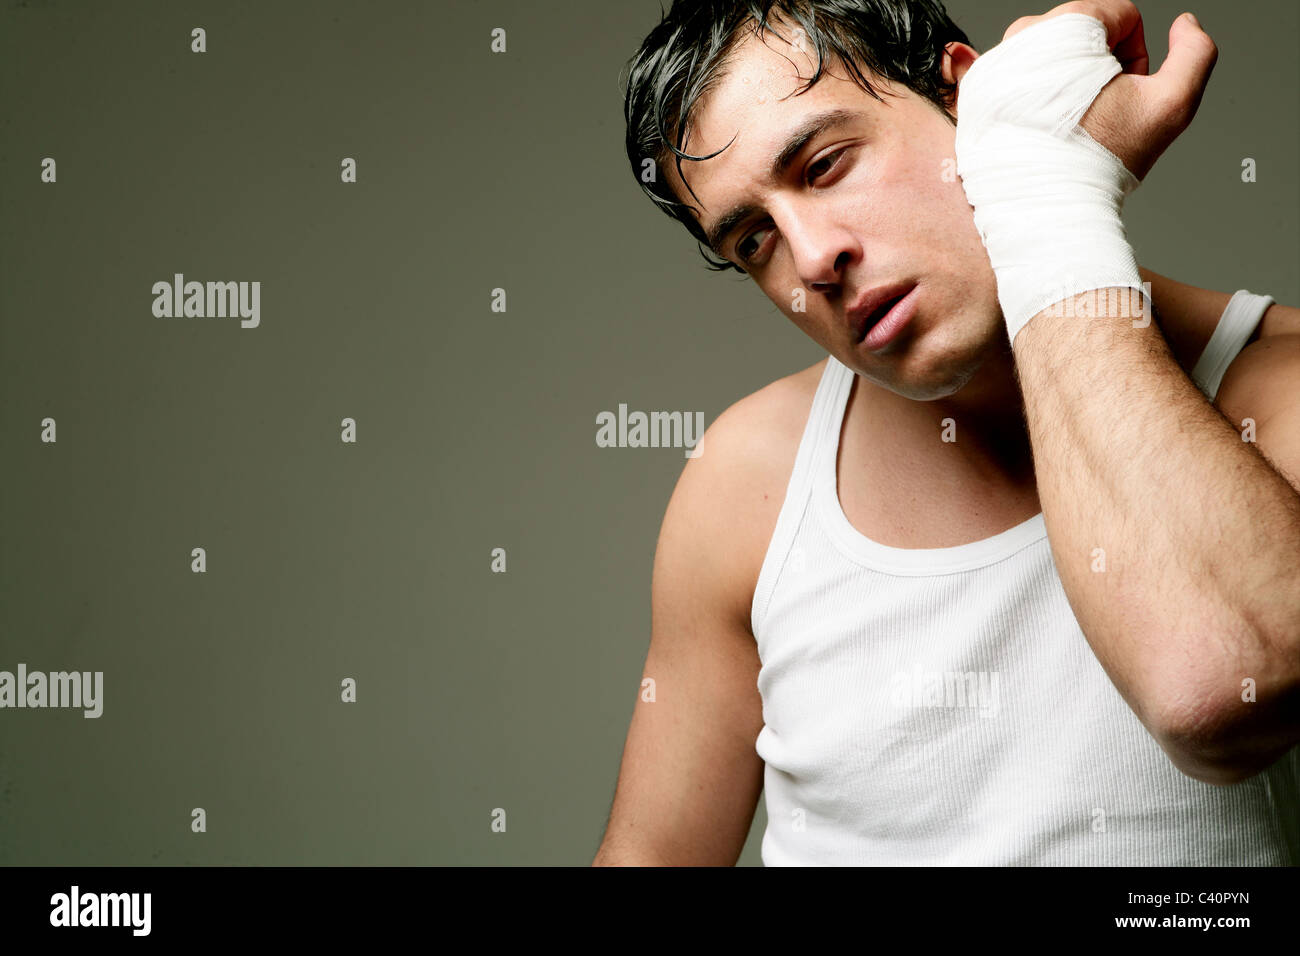 boxer, male, tank top, thoughtful, resting, portrait, pugilist, man, close up, adult, 20-29, 30s, 30-35 years, mid-adult, people Stock Photo